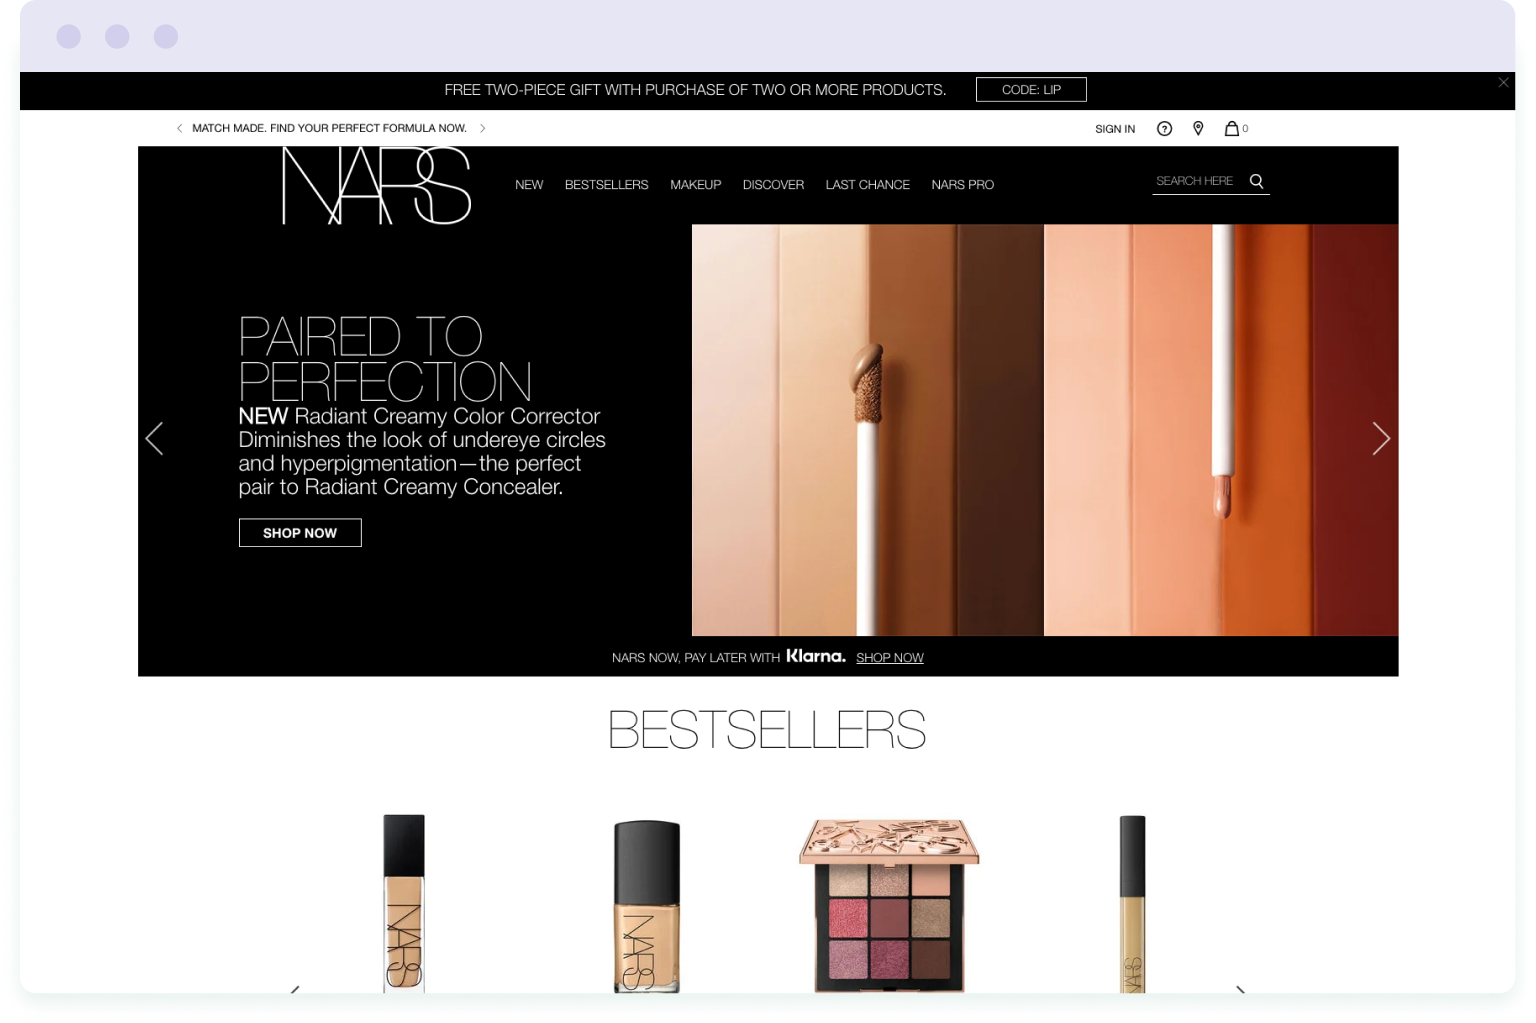 The homepage of the Nars website